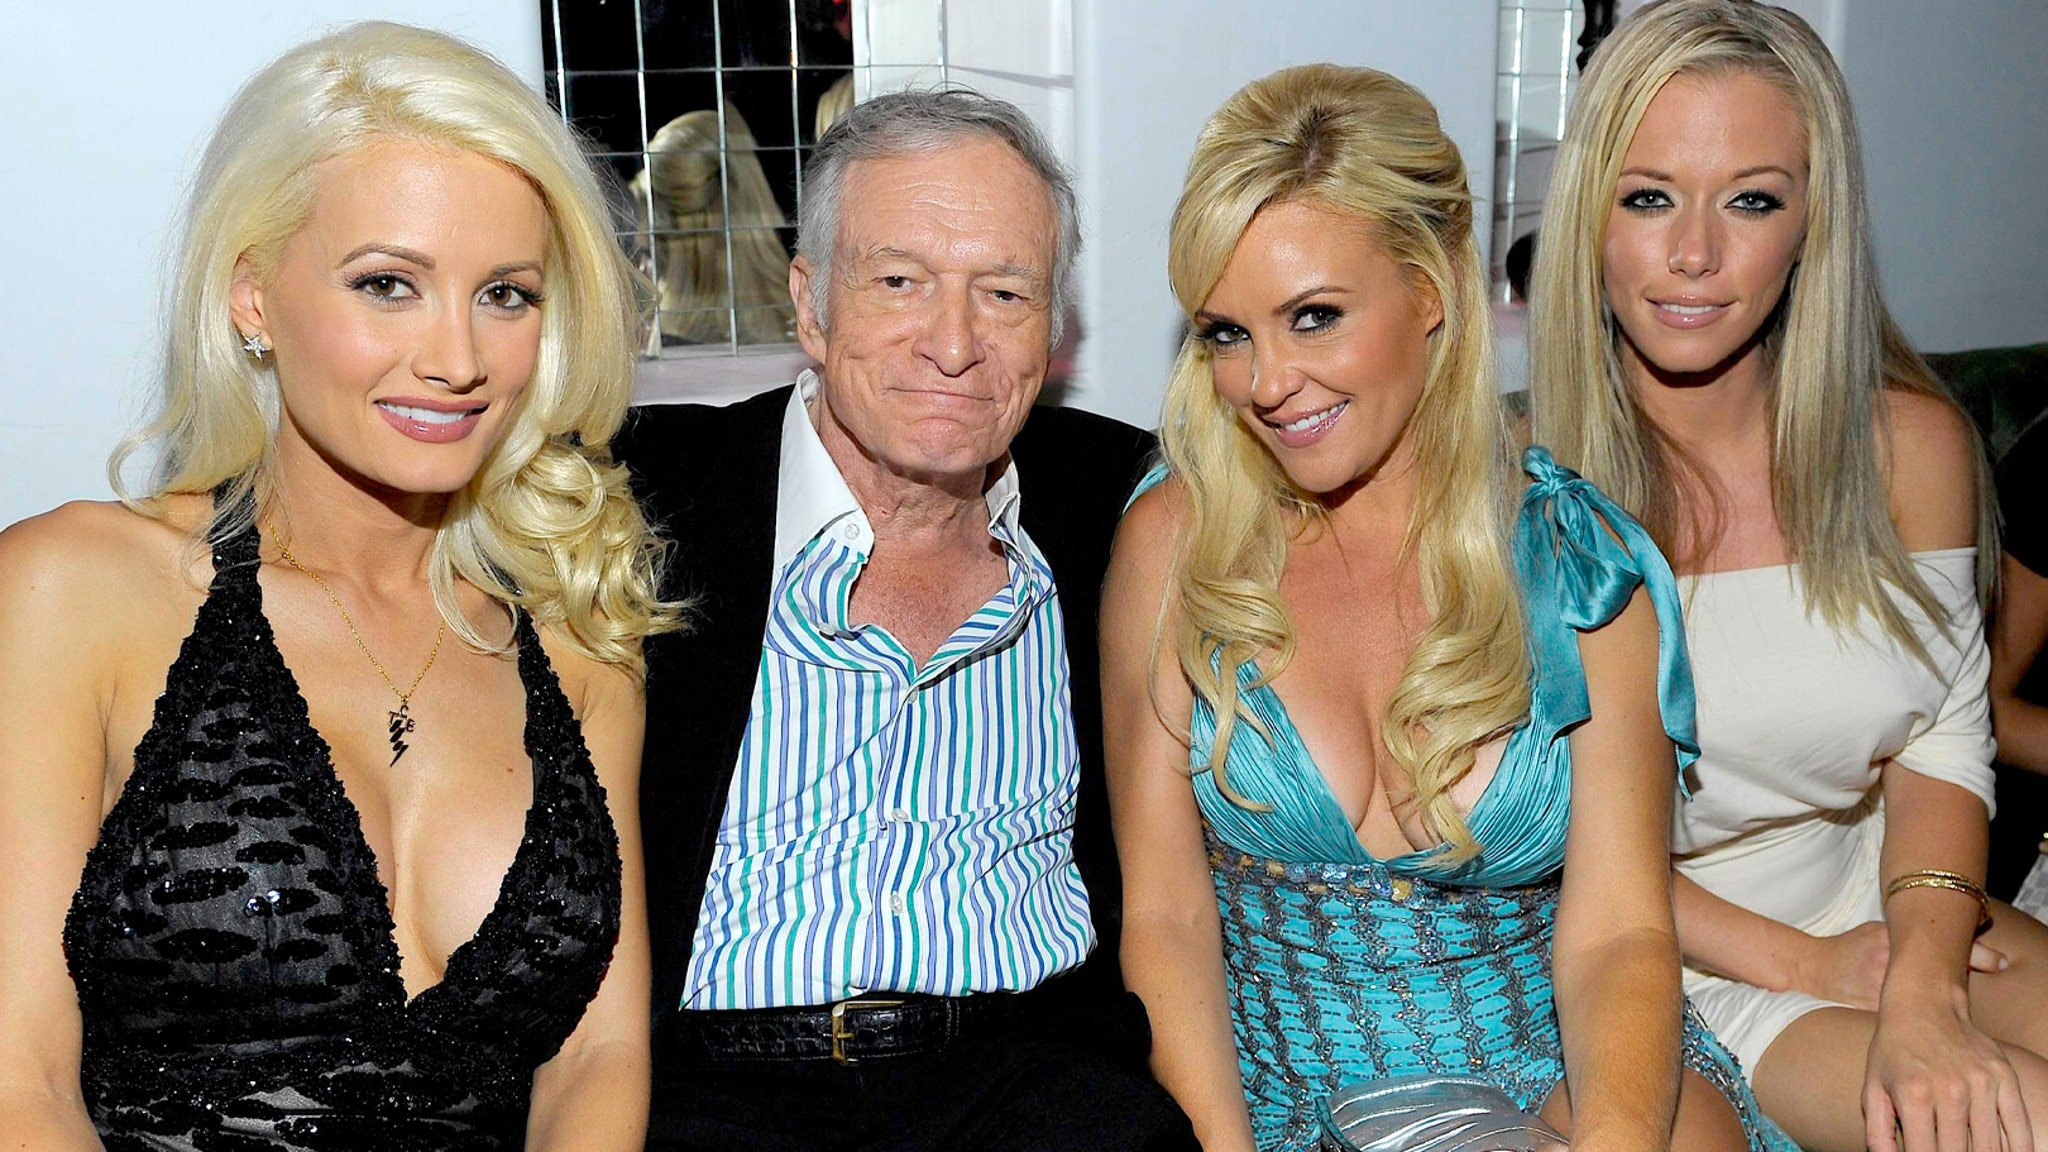 Bridget Marquardt Details First Time With Hef And Reveals Where She Stands With Kendra Wilkinson - TooFab